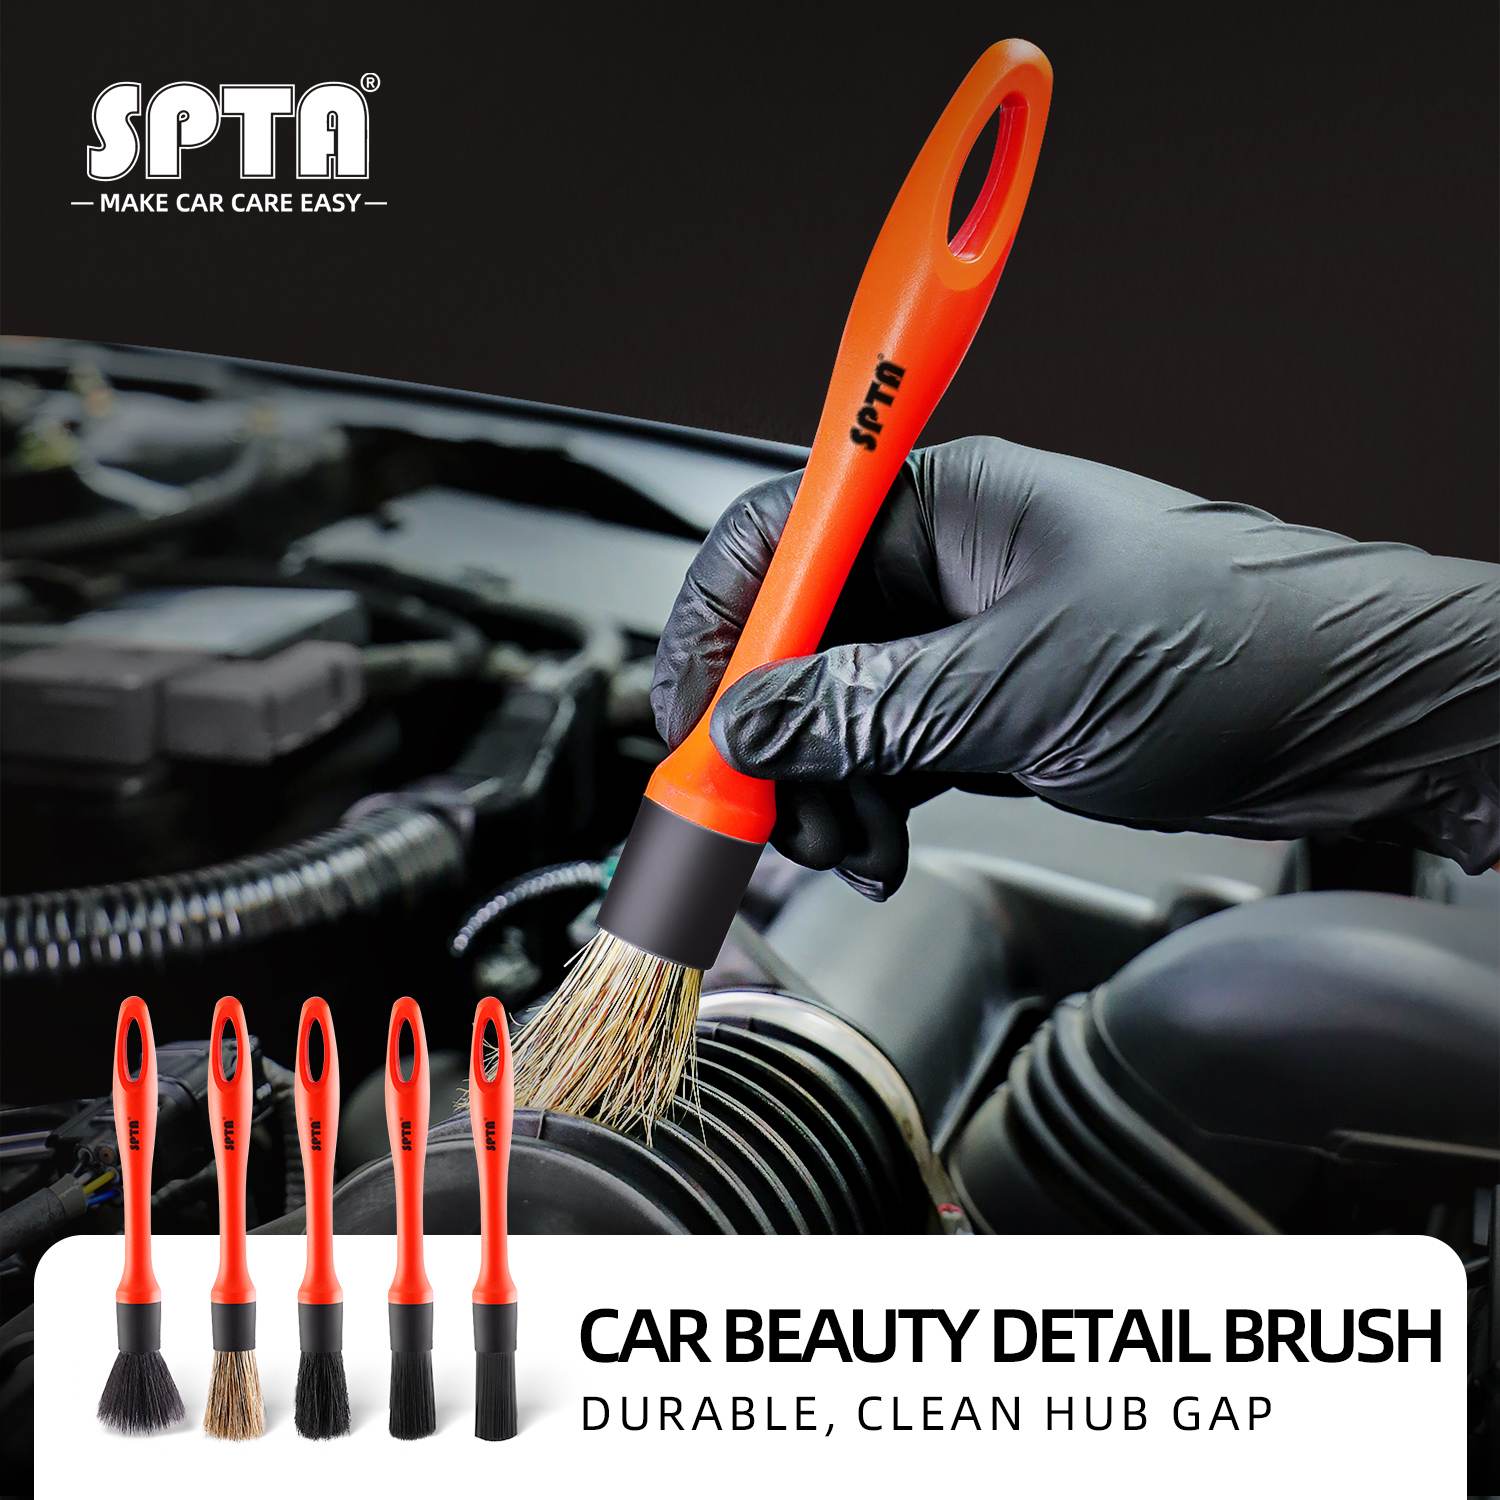 8pcs Car Detailing Brush Set Plastic Handle Automotive Air Vent Wire Rim  Brushes for Cleaning Wheels Engine Car Motorcycle Interior Exterior Leather  Air Vents 